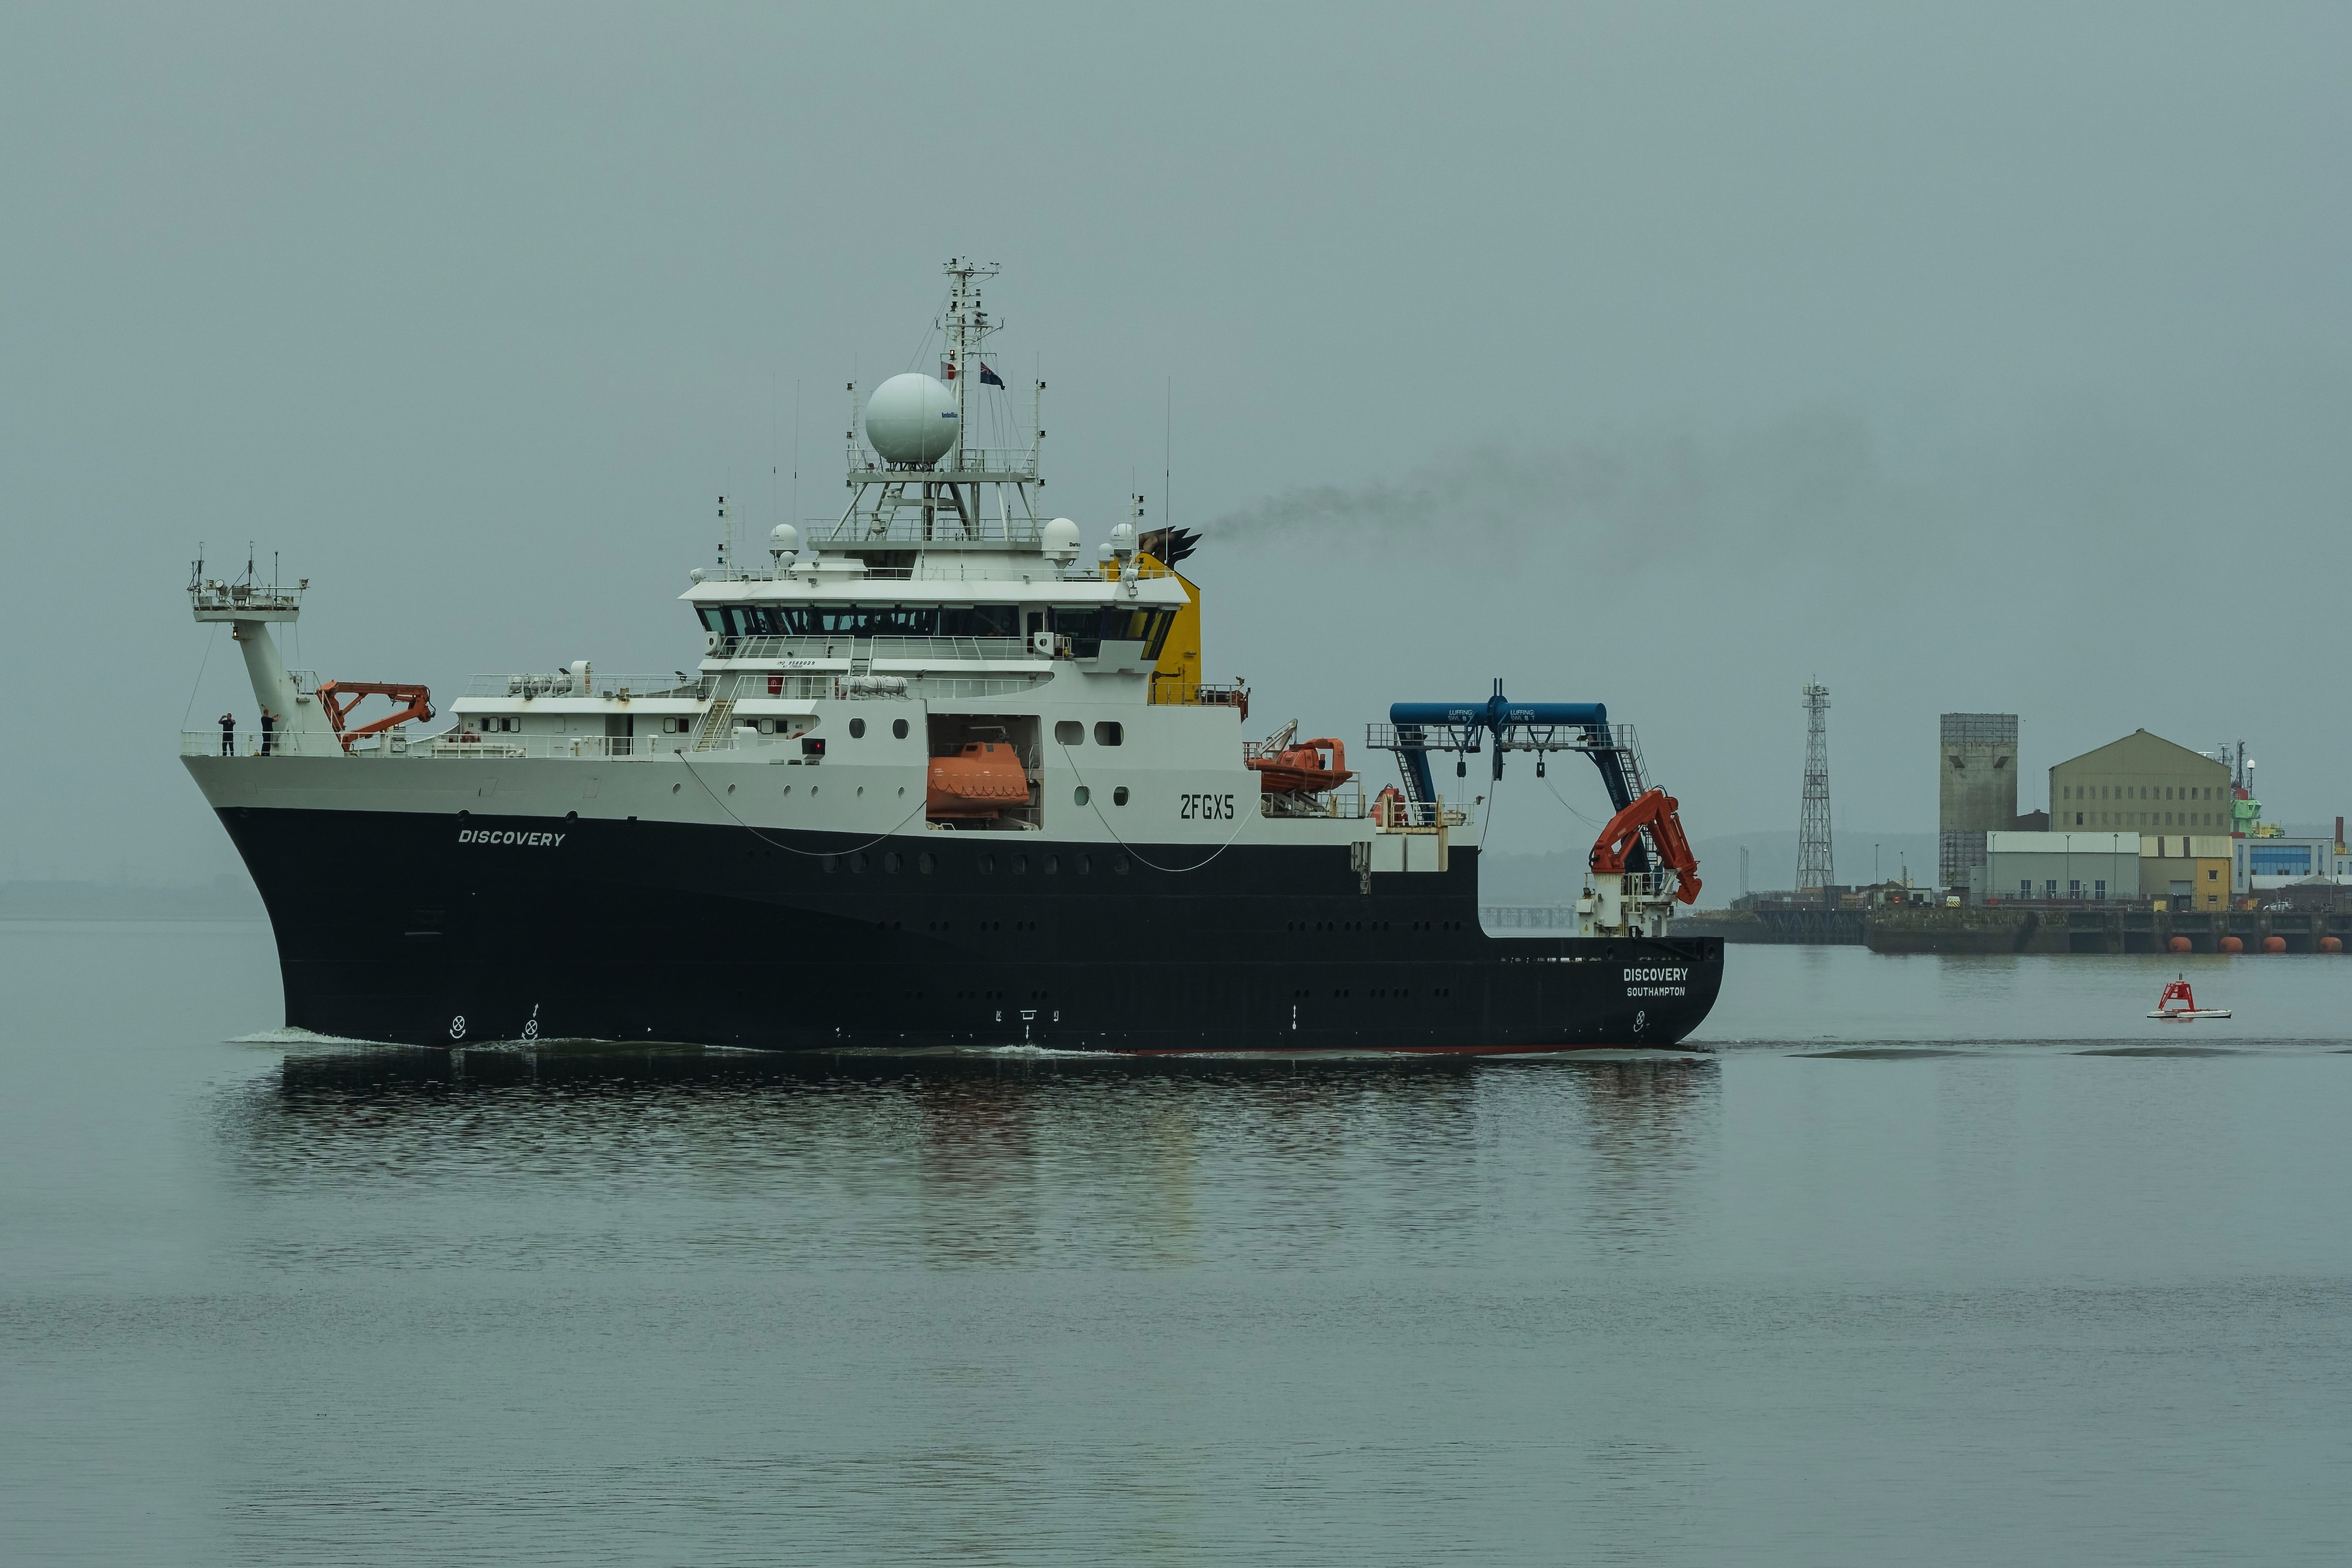 RRS Discovery photographed leaving Rosyth following its refit. Image credit: Brian Donovan